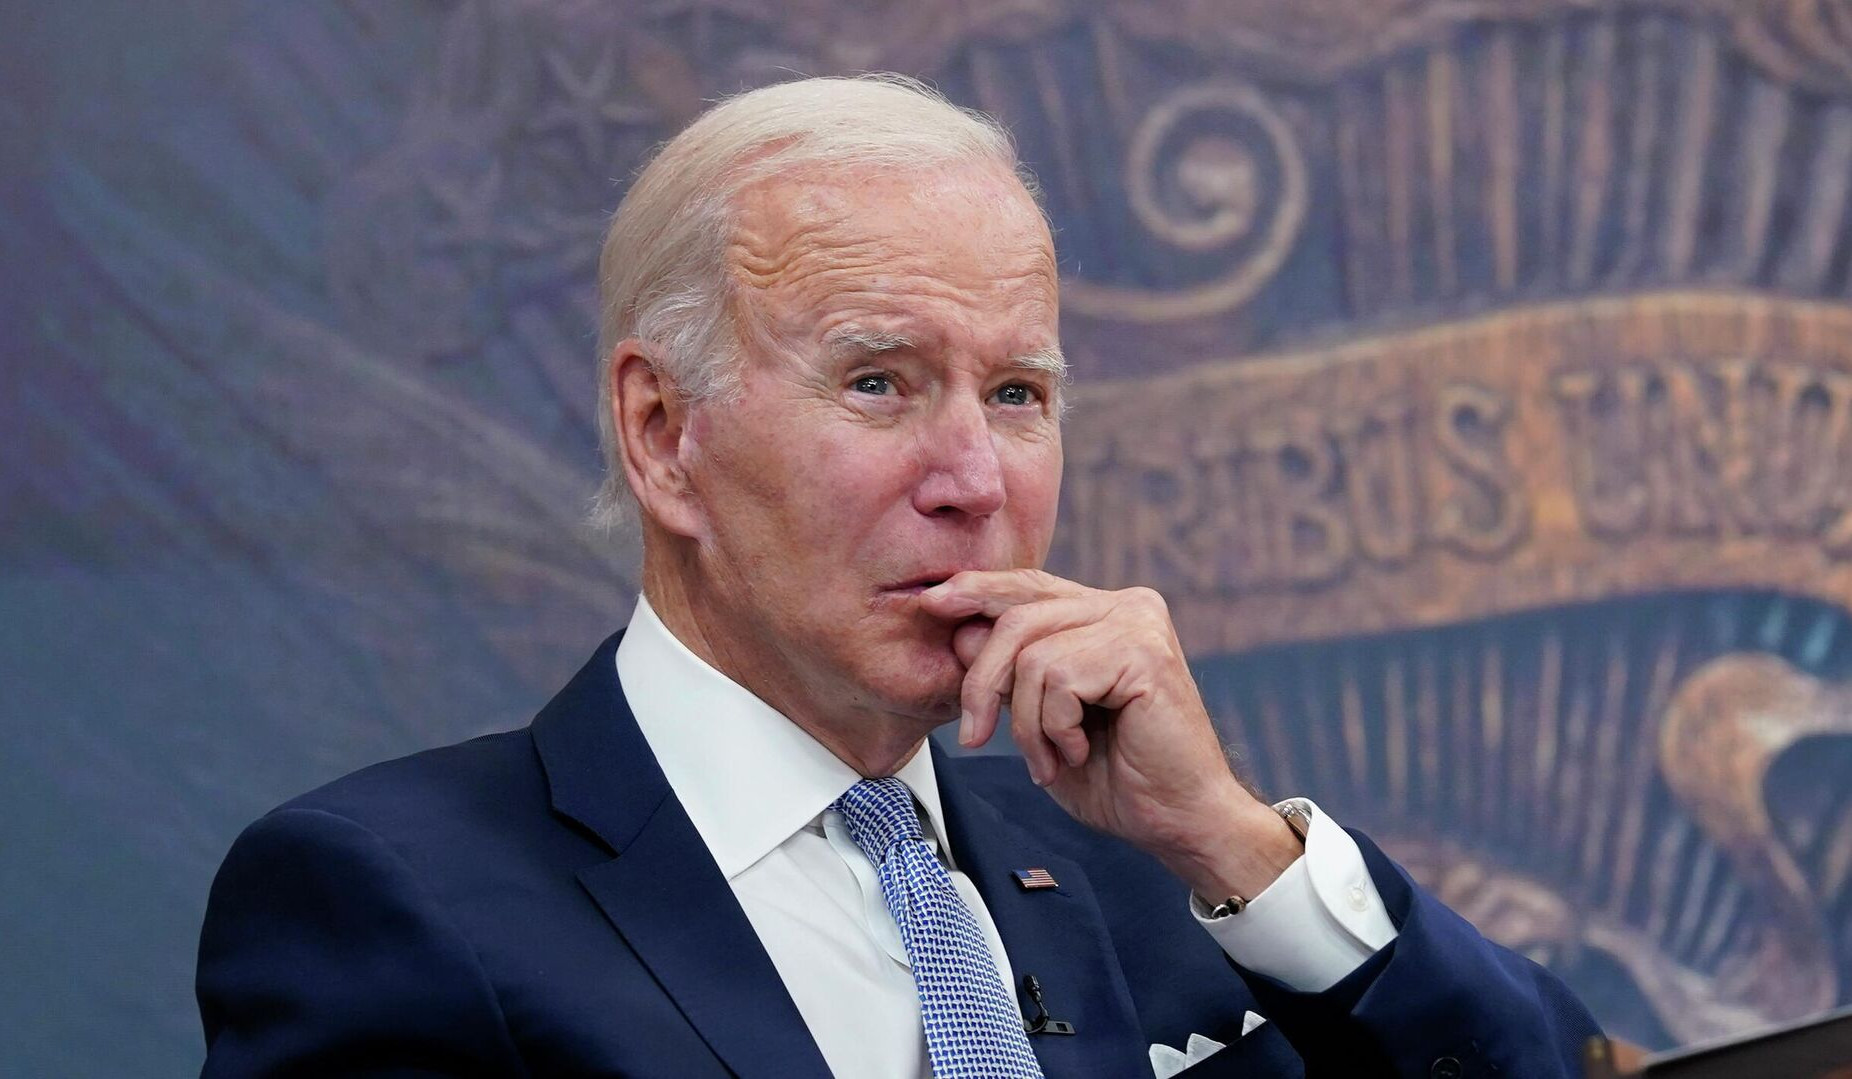 Biden expressed confidence that he can defeat Trump